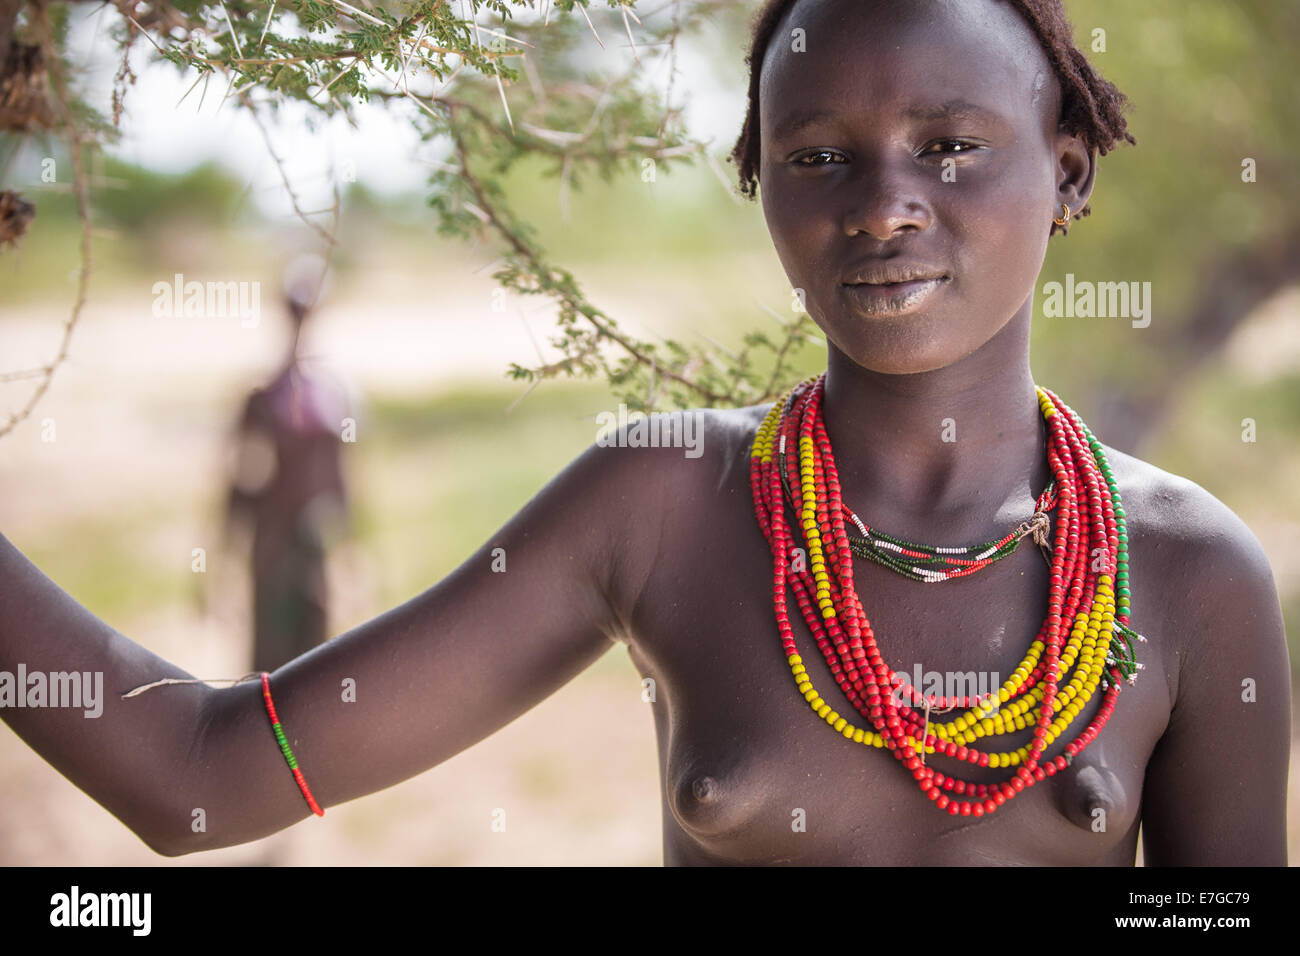 Dassanetch girl with traditional clothing in southern Ethiopia, Ethiopia 13 May 2014. Stock Photo